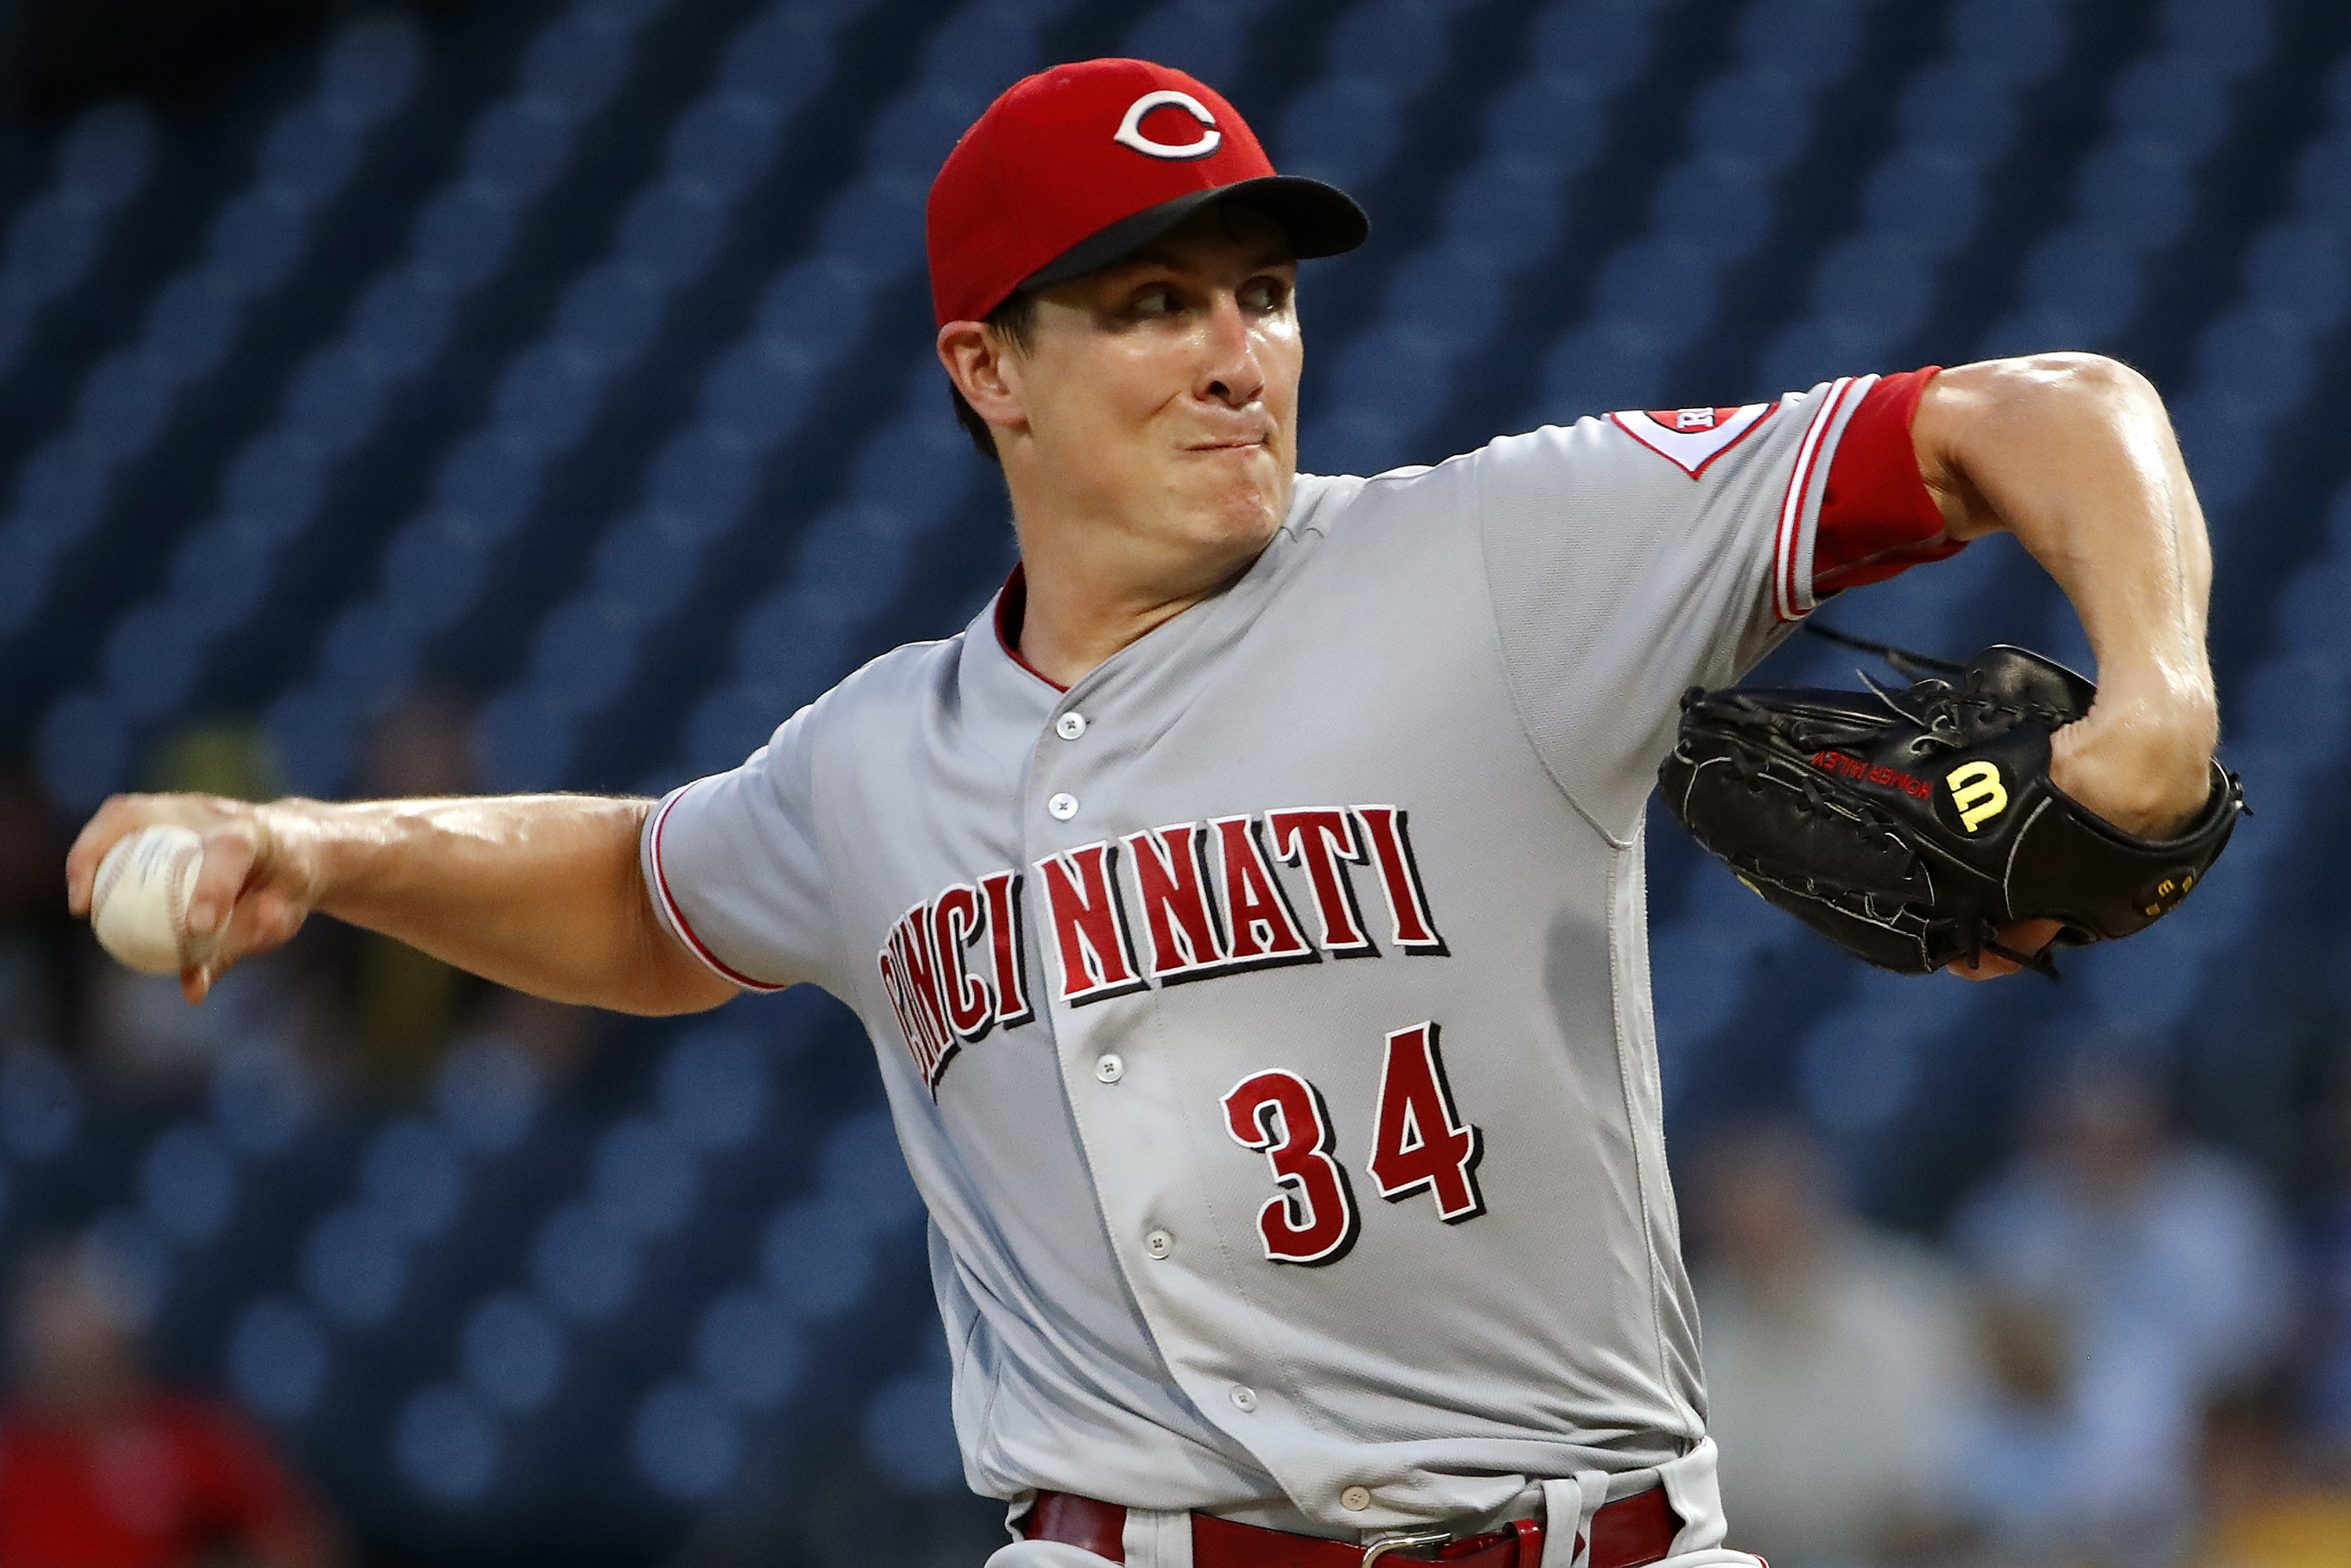 Reds drop Homer Bailey from rotation